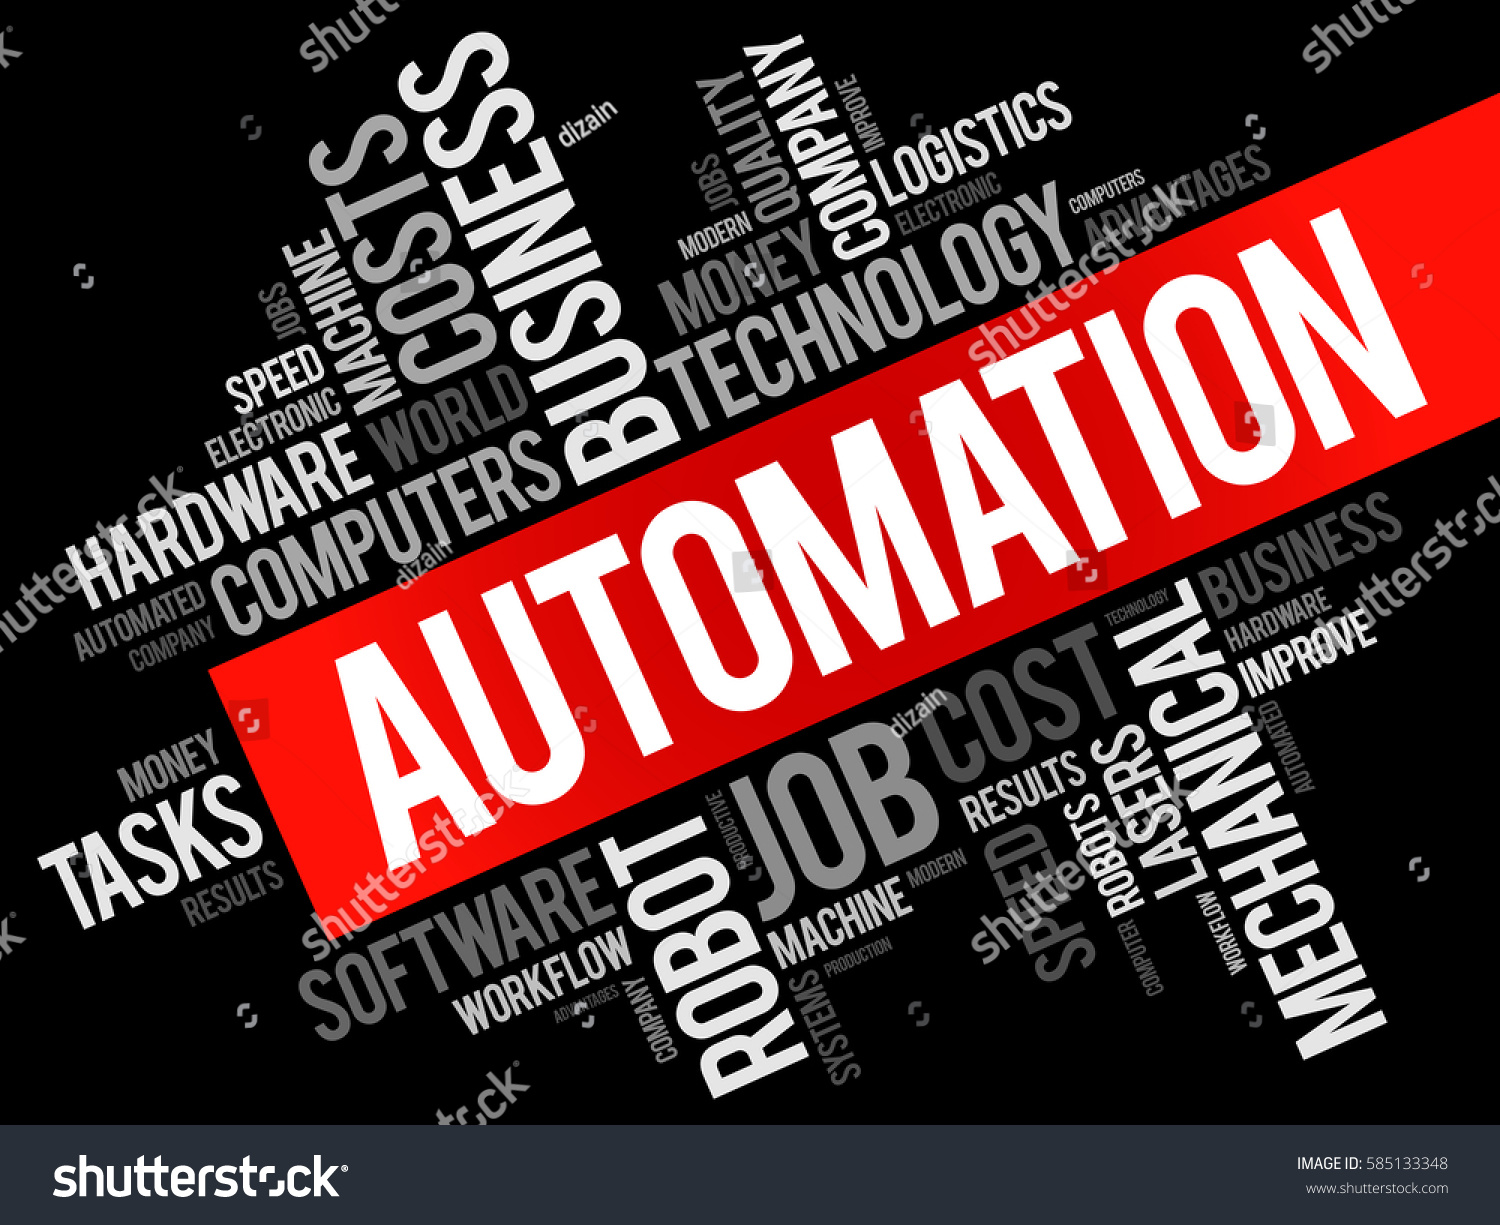 Automation - range of technologies that reduce human intervention in processes, word cloud concept background #585133348